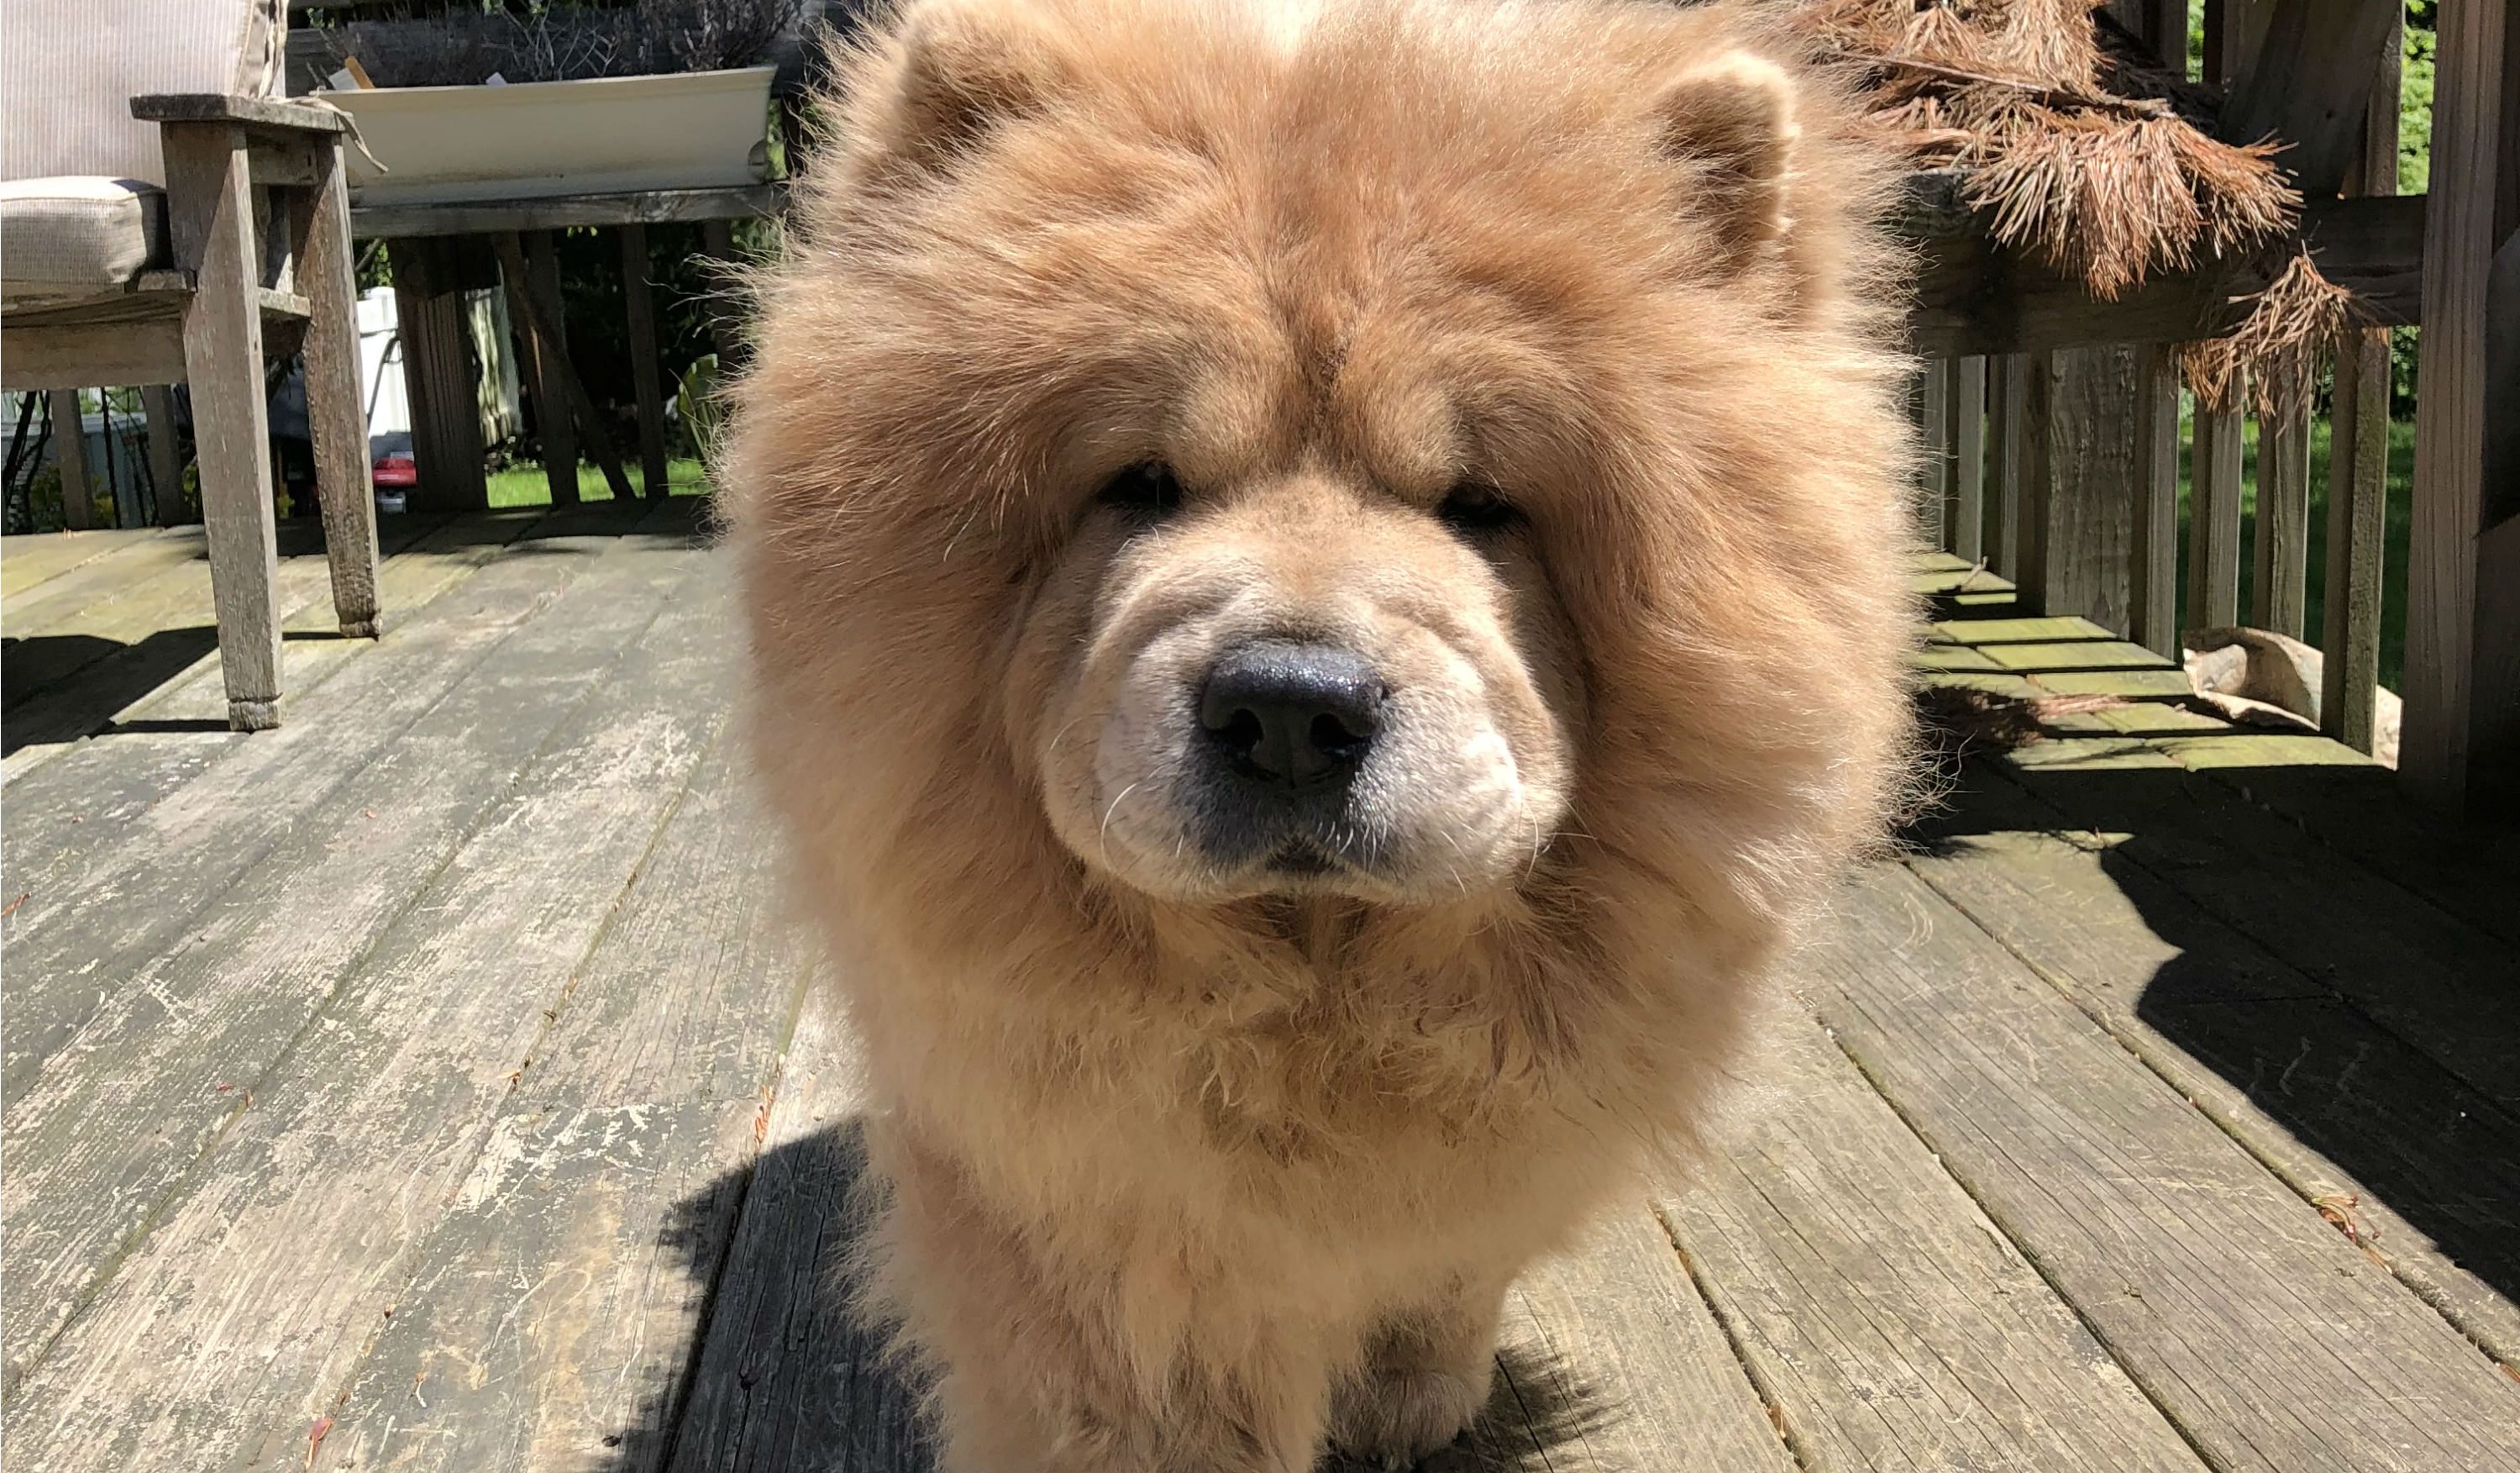 Happy Tails: Cookie the Chow Chow